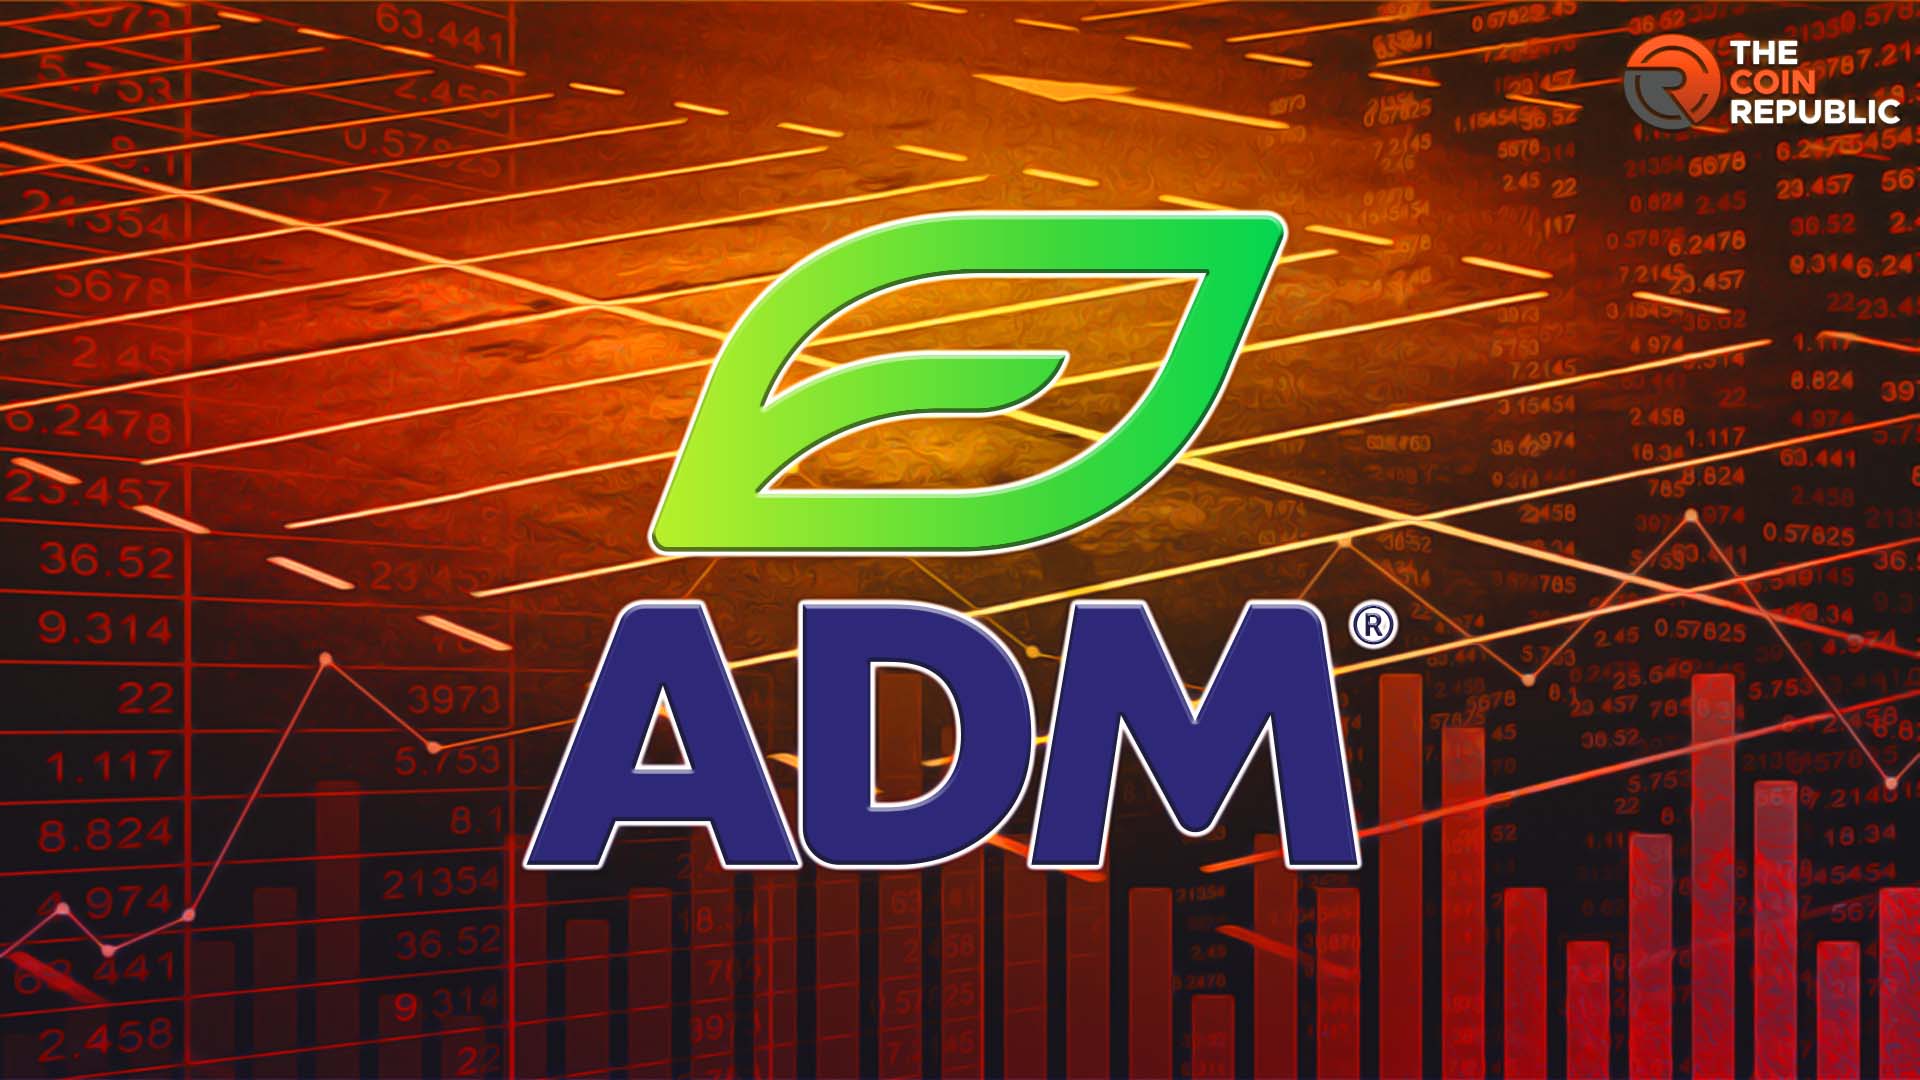 ADM Stock Price Shedding Volatility But Will Likely Remain Choppy